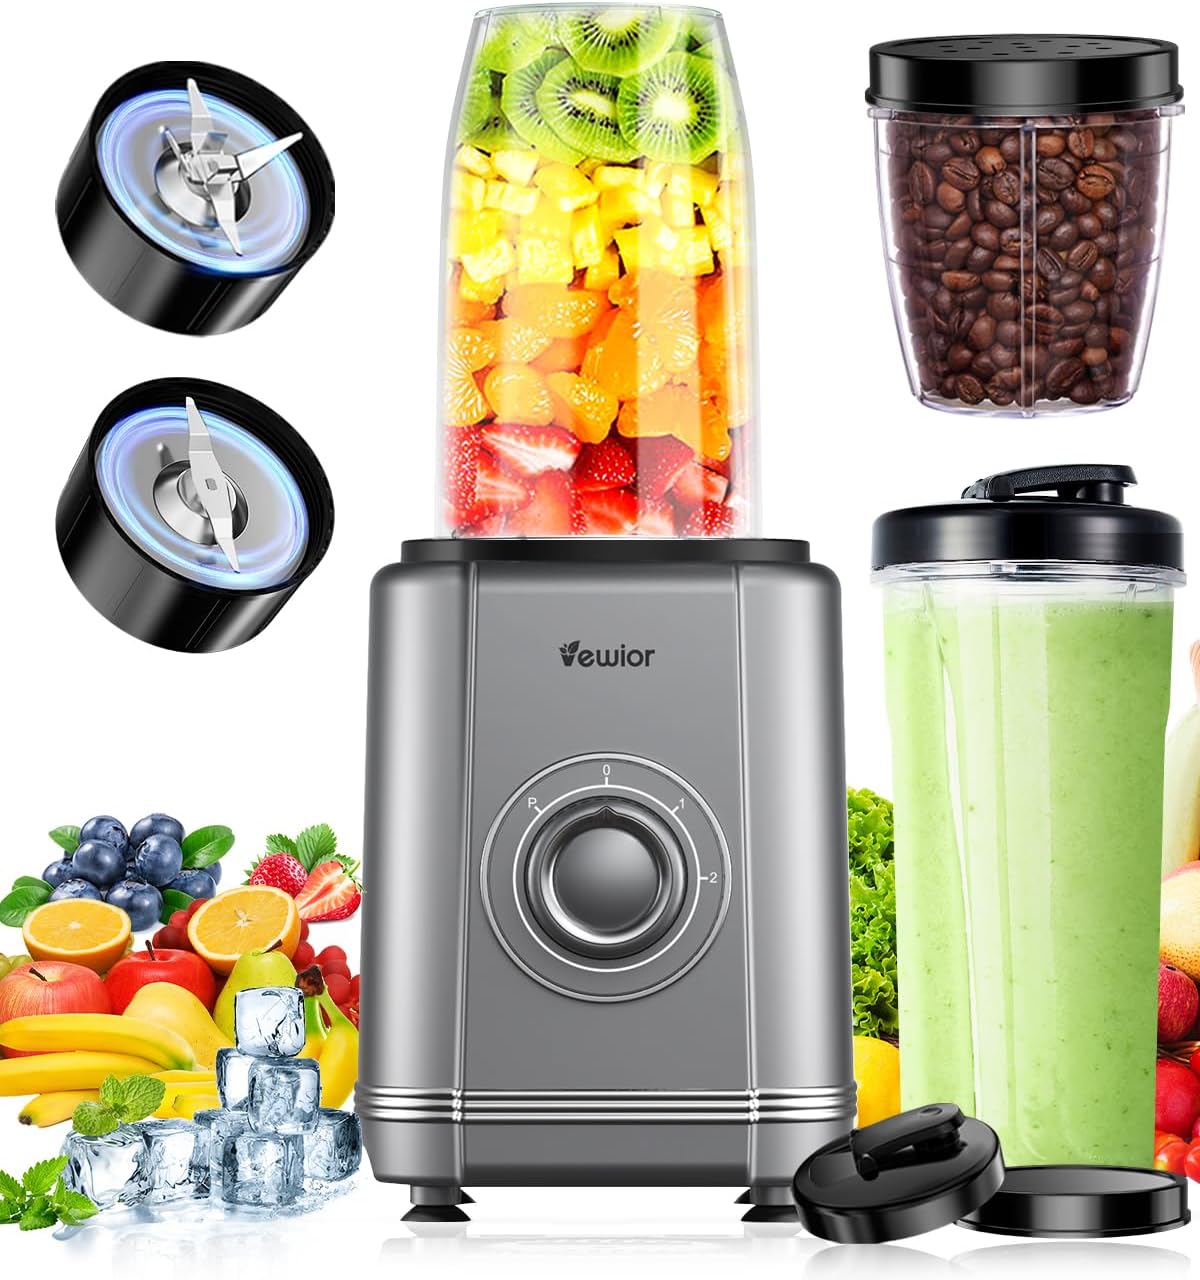 1200W Blender for Shakes and Smoothies, VEWIOR Personal Blender with 6-Edge Blade, 17oz & 23oz BPA Free To-Go Cups, 3 Modes Control, Suitable for Kitchen, Ideal for Frozen Drinks Vewior